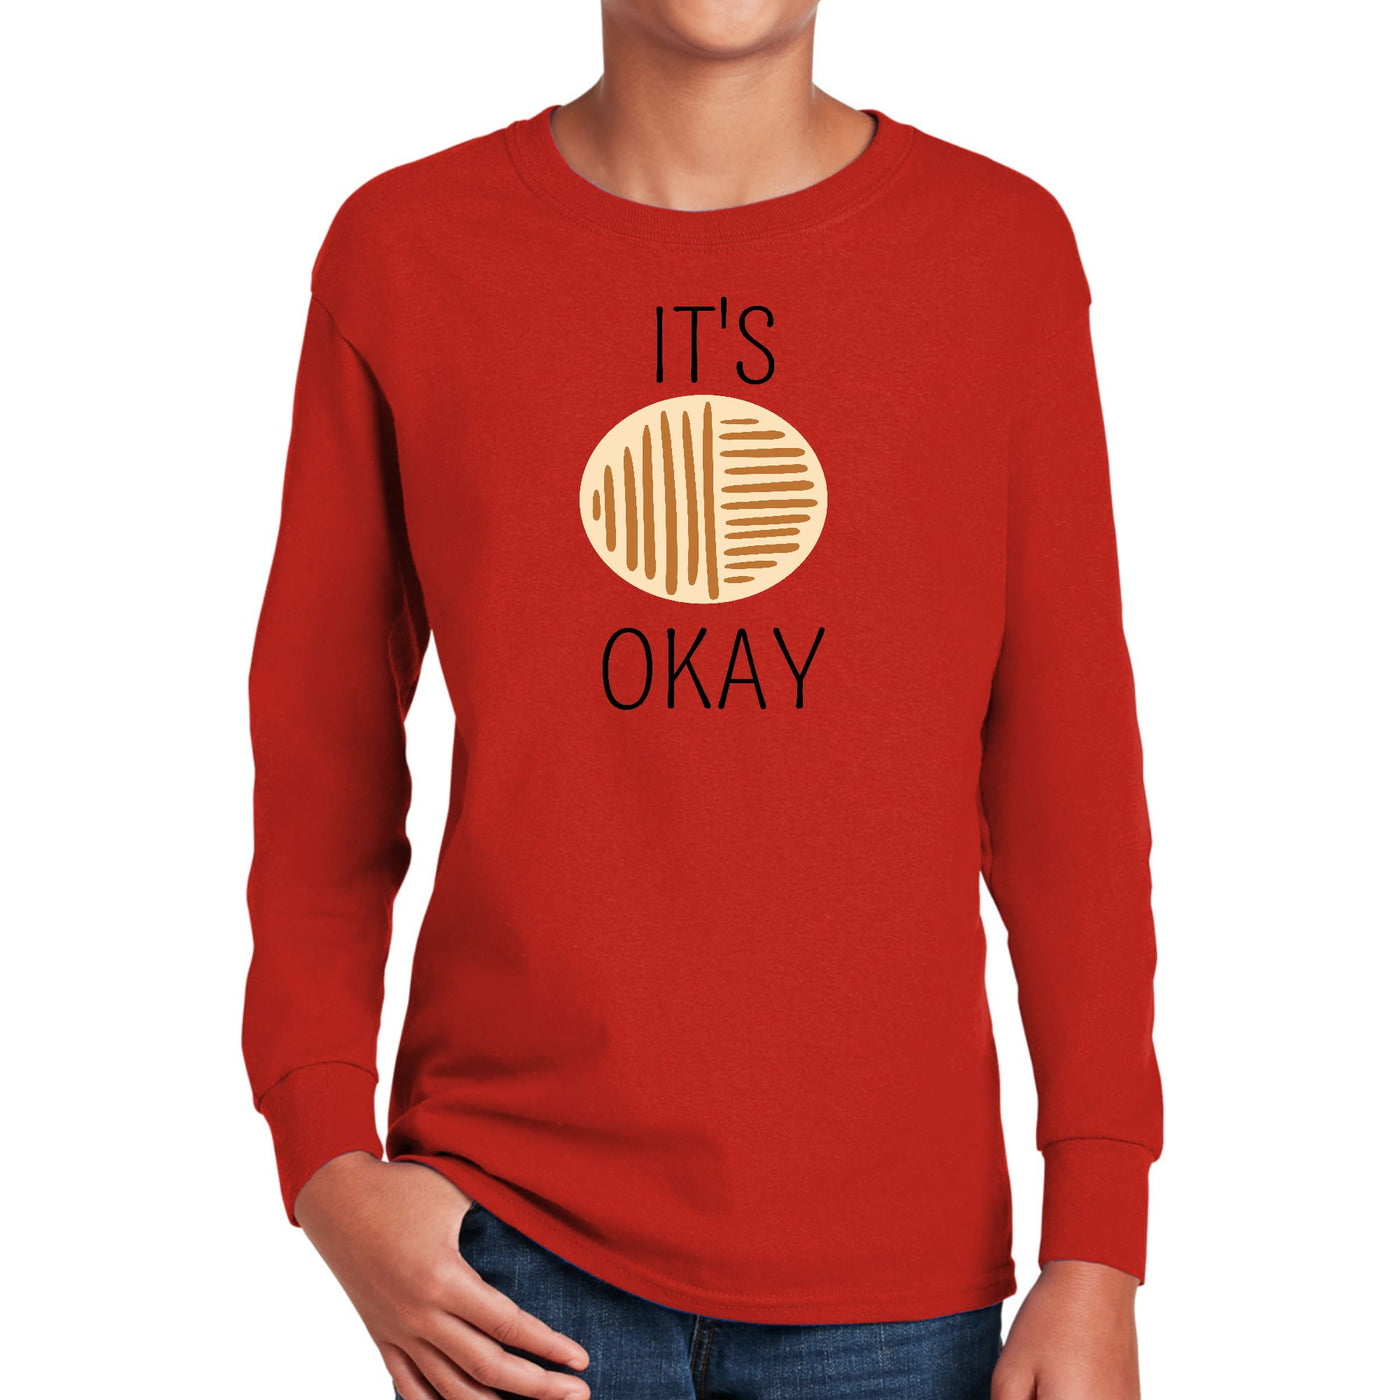 Youth Long Sleeve Graphic T-shirt Say It Soul Its Okay Black - Youth | T-Shirts